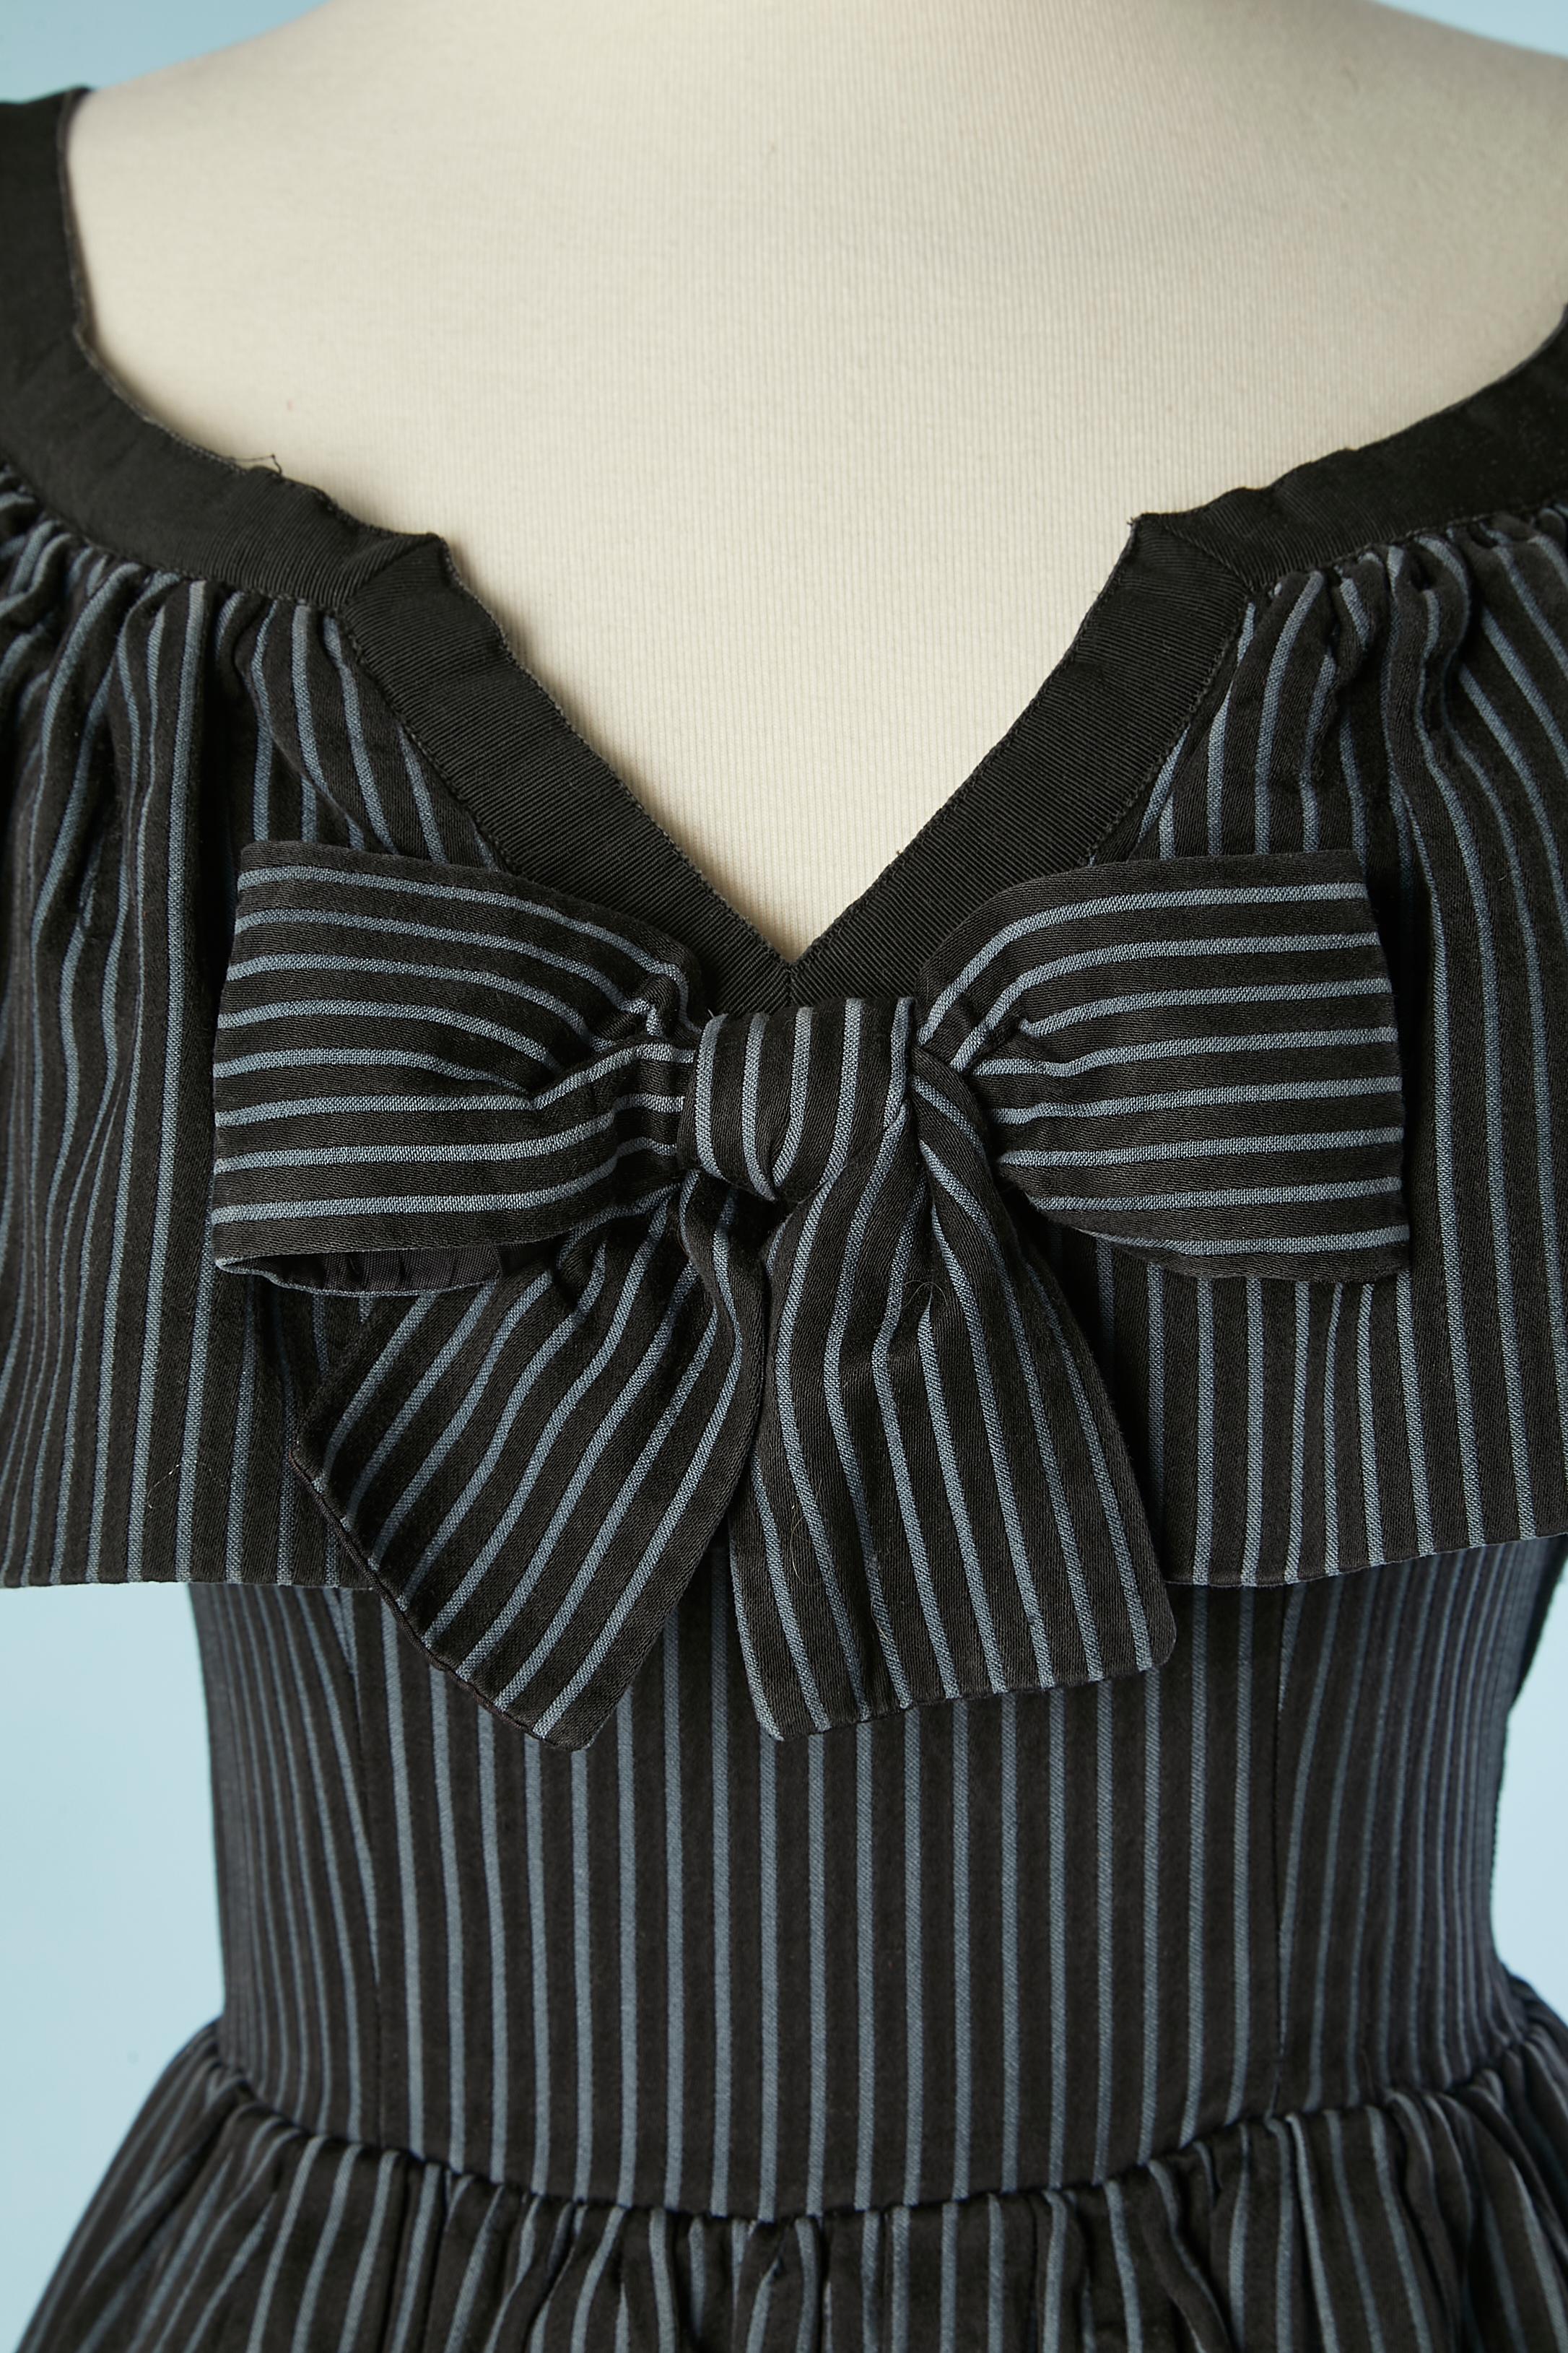 Black cotton dress with blue stripes, ruffles and bow in the middle front.  Boned. Upper cloth: 100% cotton, lining: 100% silk. Zip on the left side. Gros-grain on the edge of neckline and on both side. Ruffles on shoulders. SS 1993
SIZE 36 (6 Us)